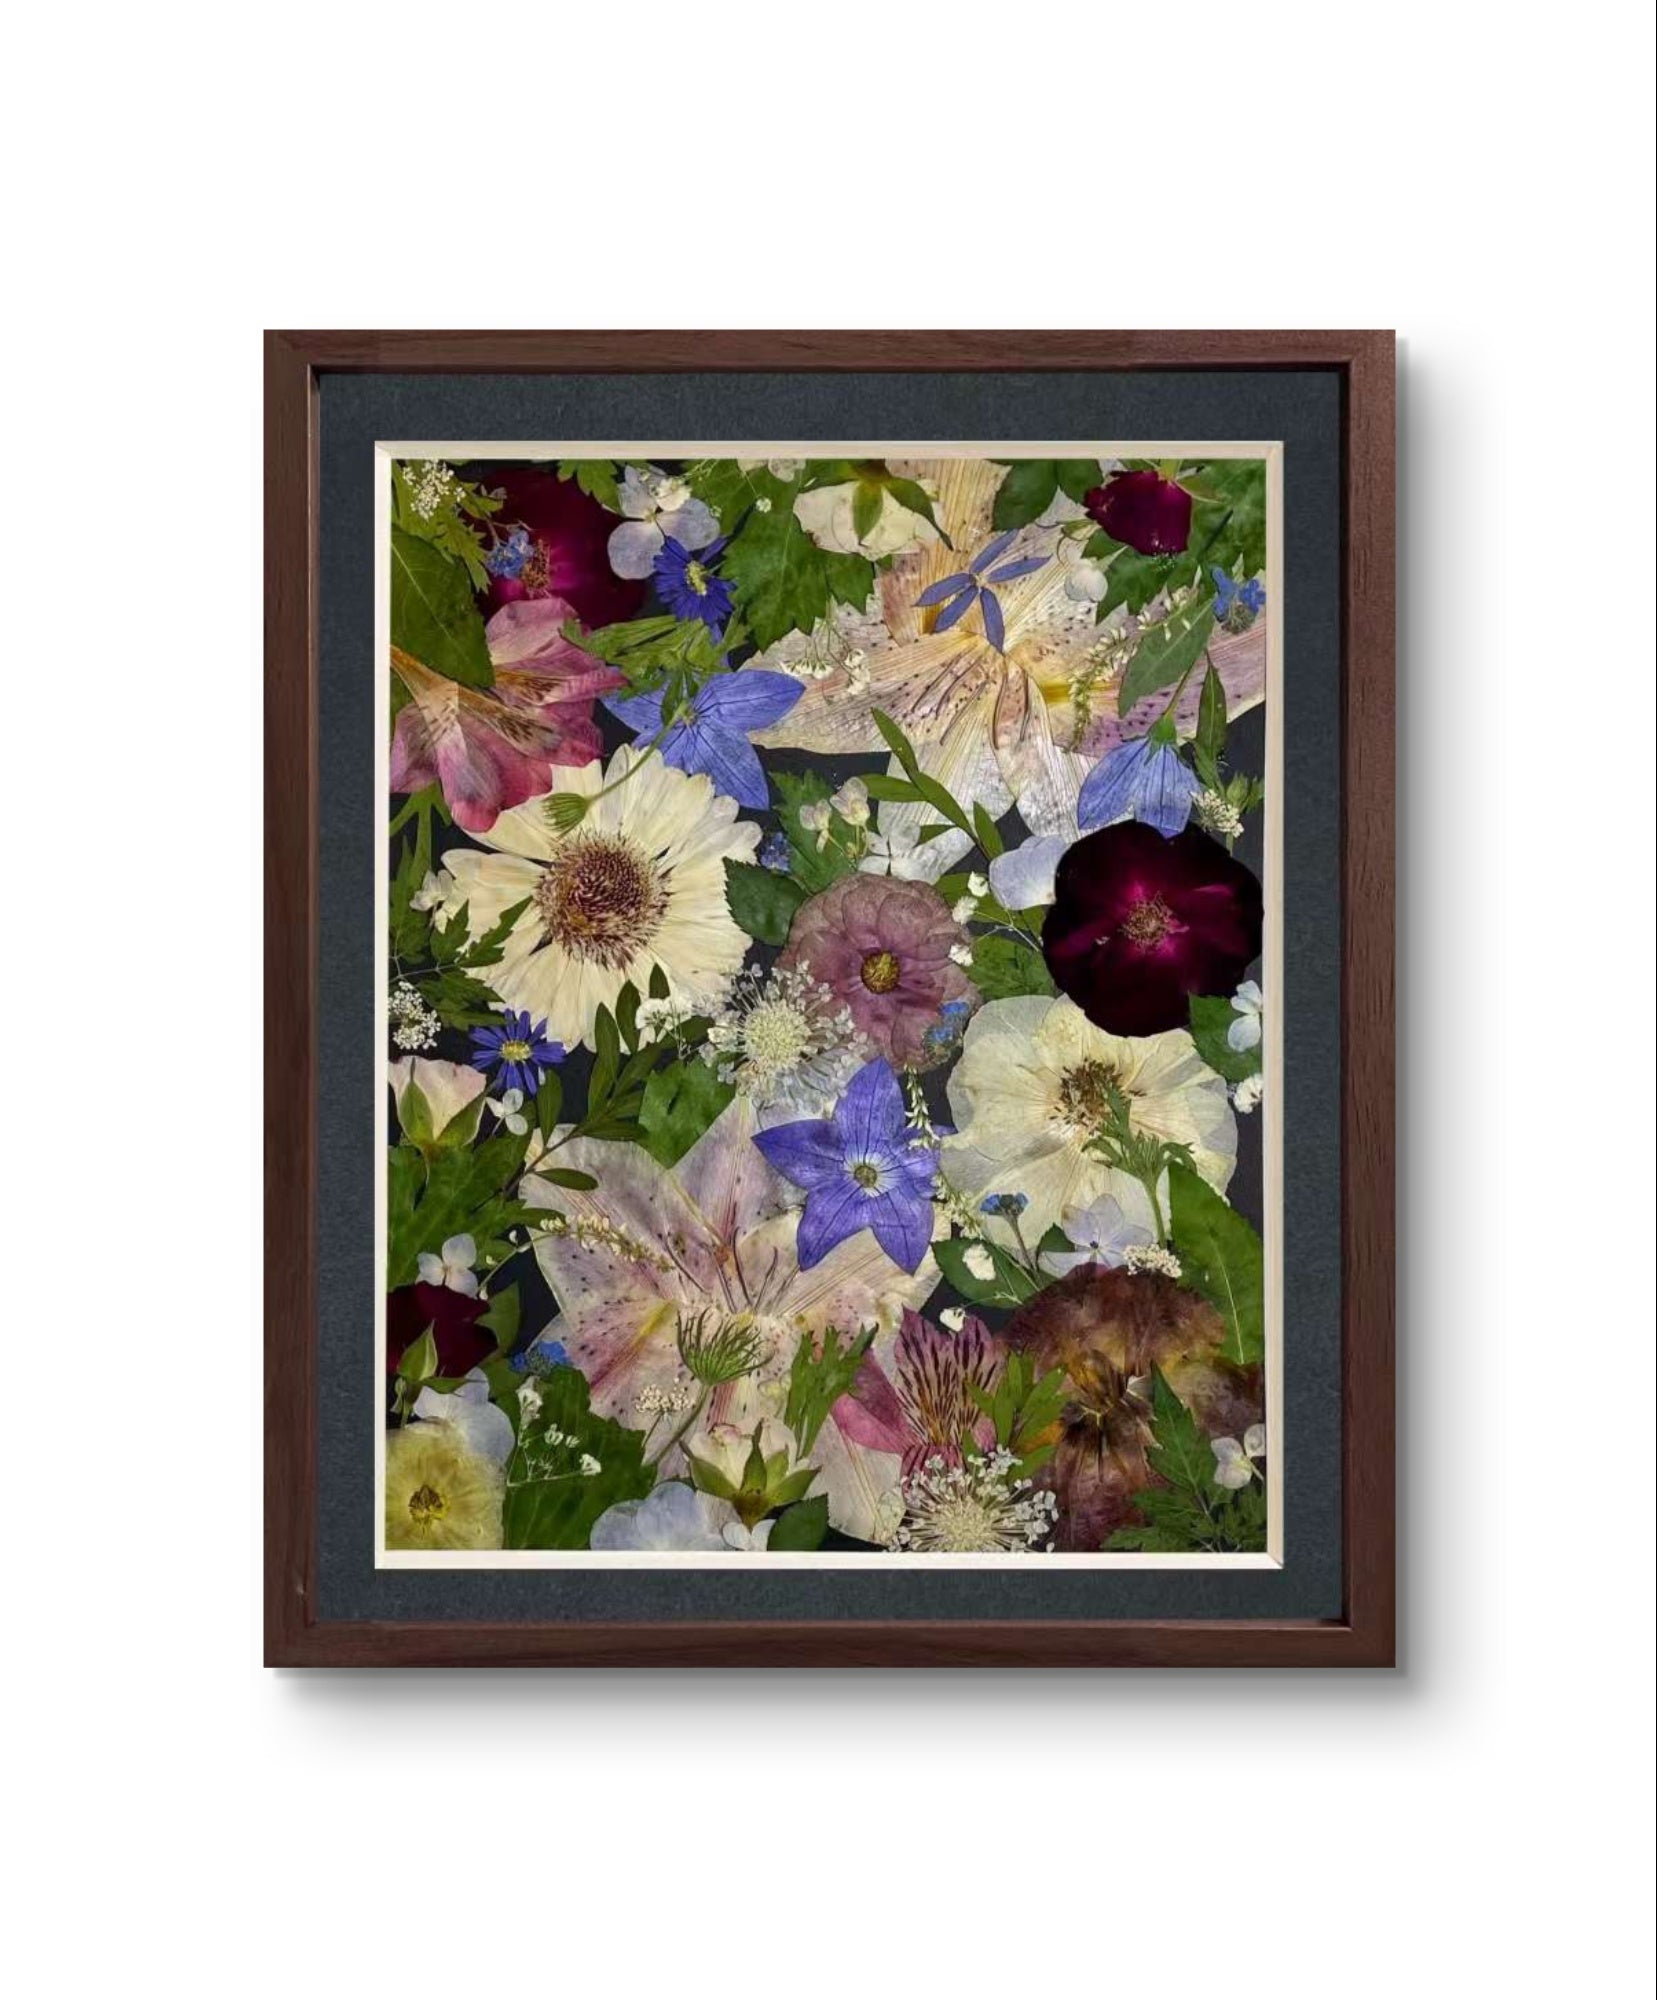 Sparkle stars theme 11 inches width 12.5 inches height pressed flower frame art.